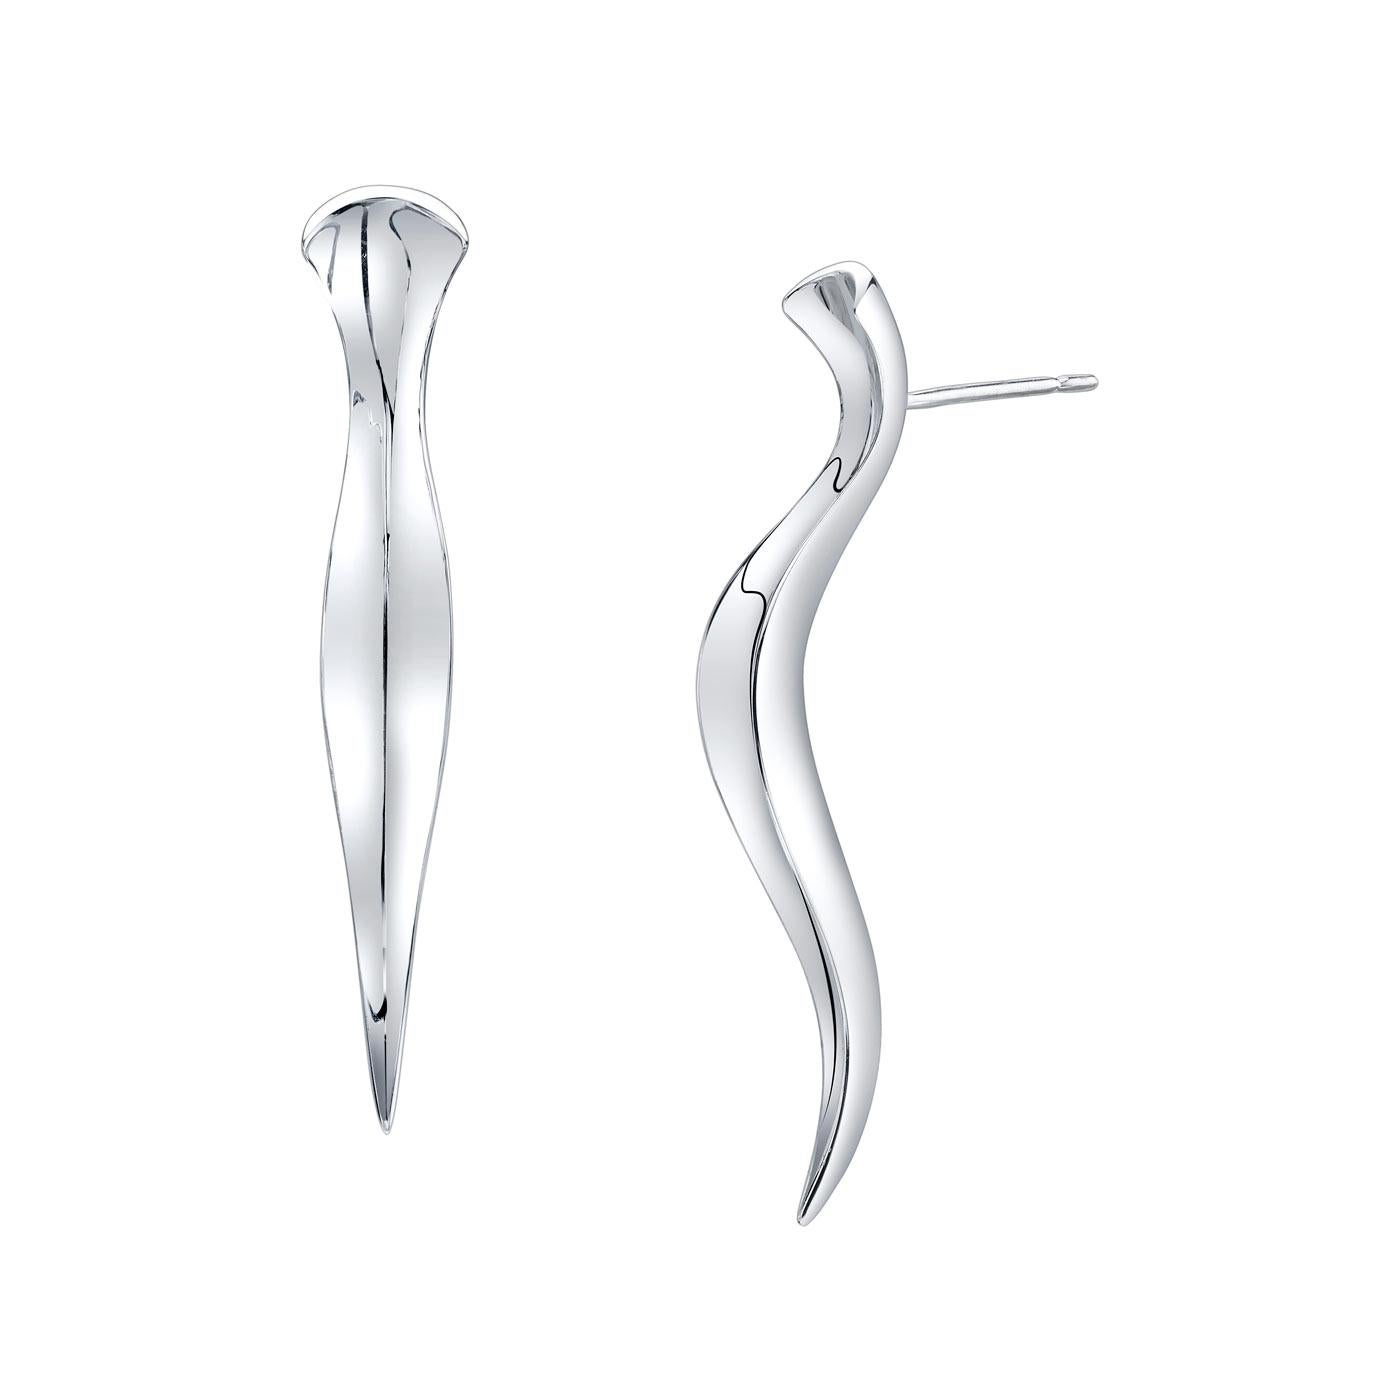 Couture Sculptural Contemporary, Long Pointed Earrings in 18K White Gold For Sale 2